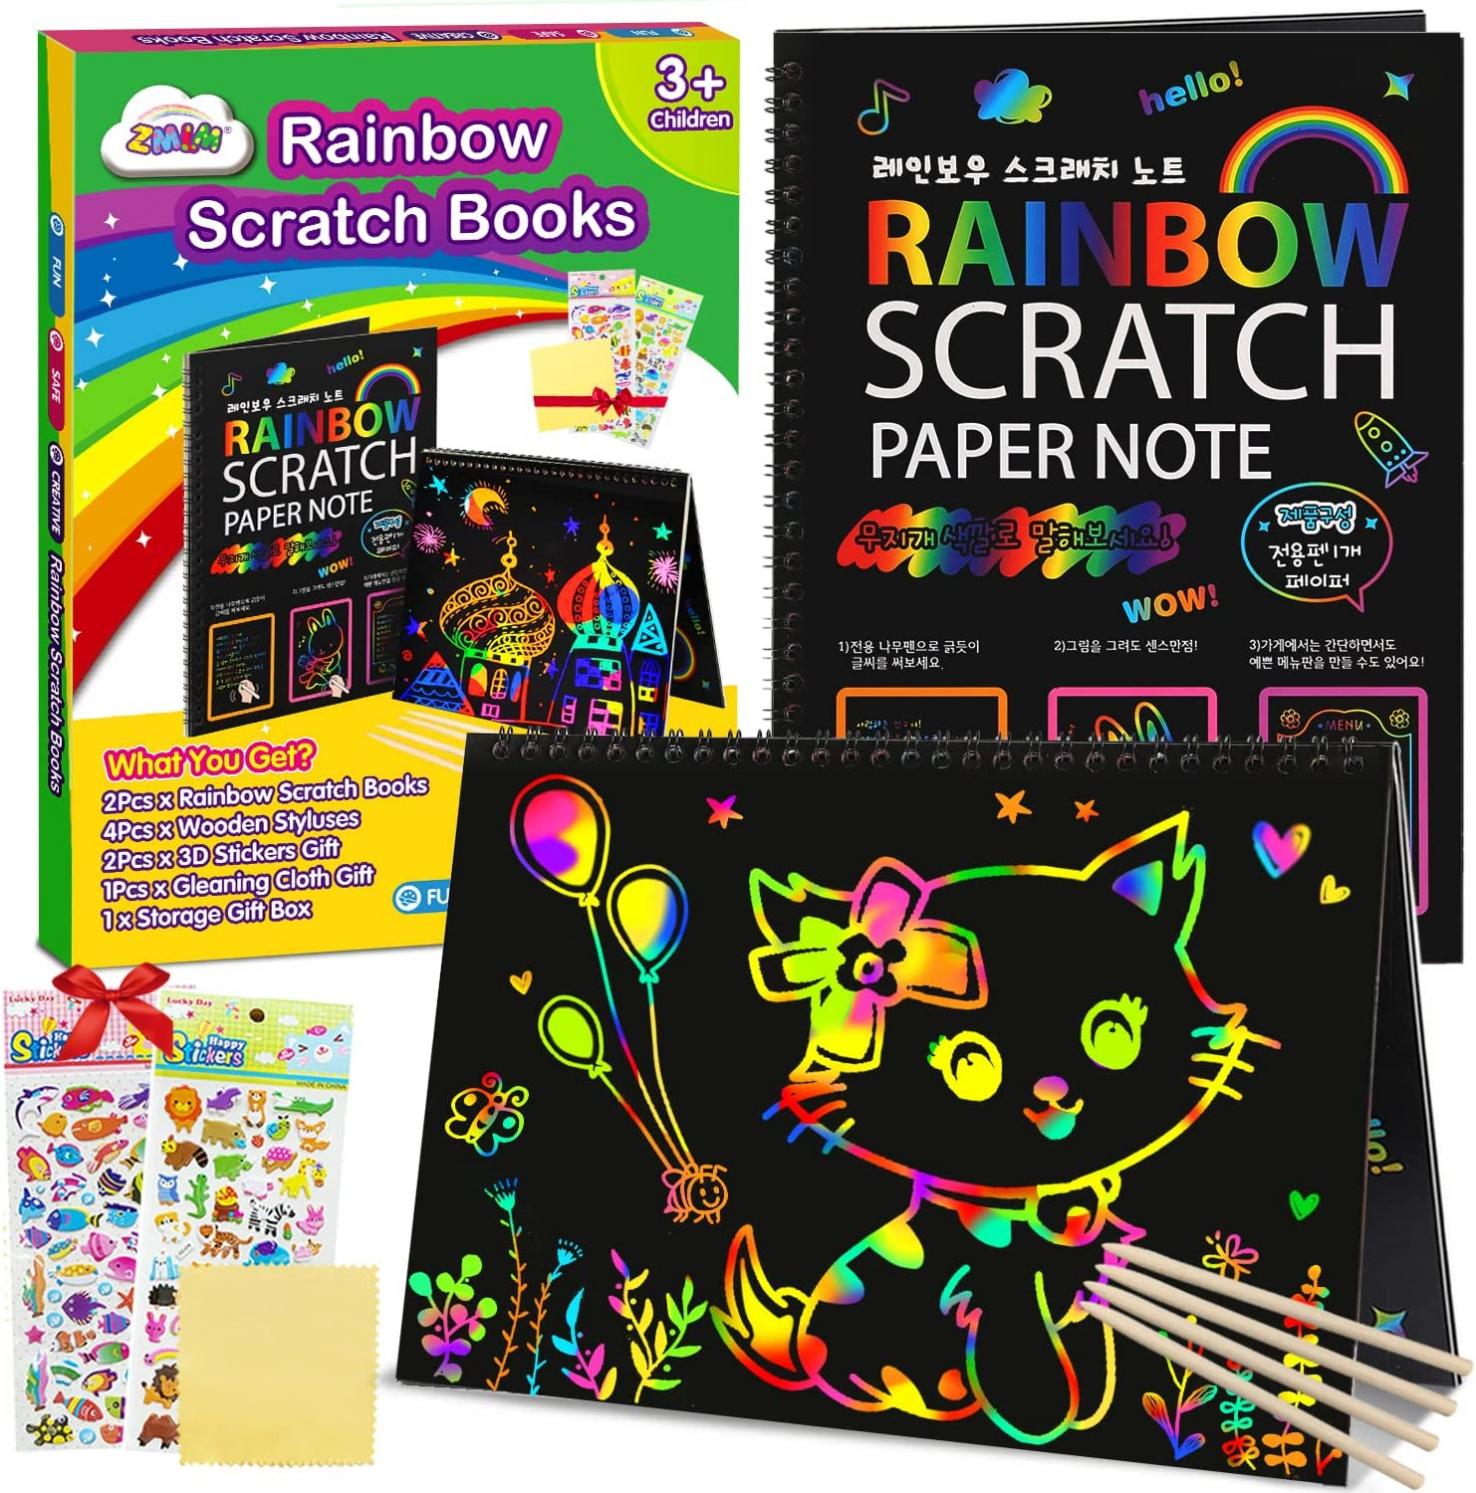 ZMLM Scratch Paper Art-Craft Gifts - Rainbow Scratch Off Art Set for Kids Activity Coloring Craft Drawing Pad Black Magic Art Craft Supplies Kits for Girls Boys Birthday Present Party Christmas Toys